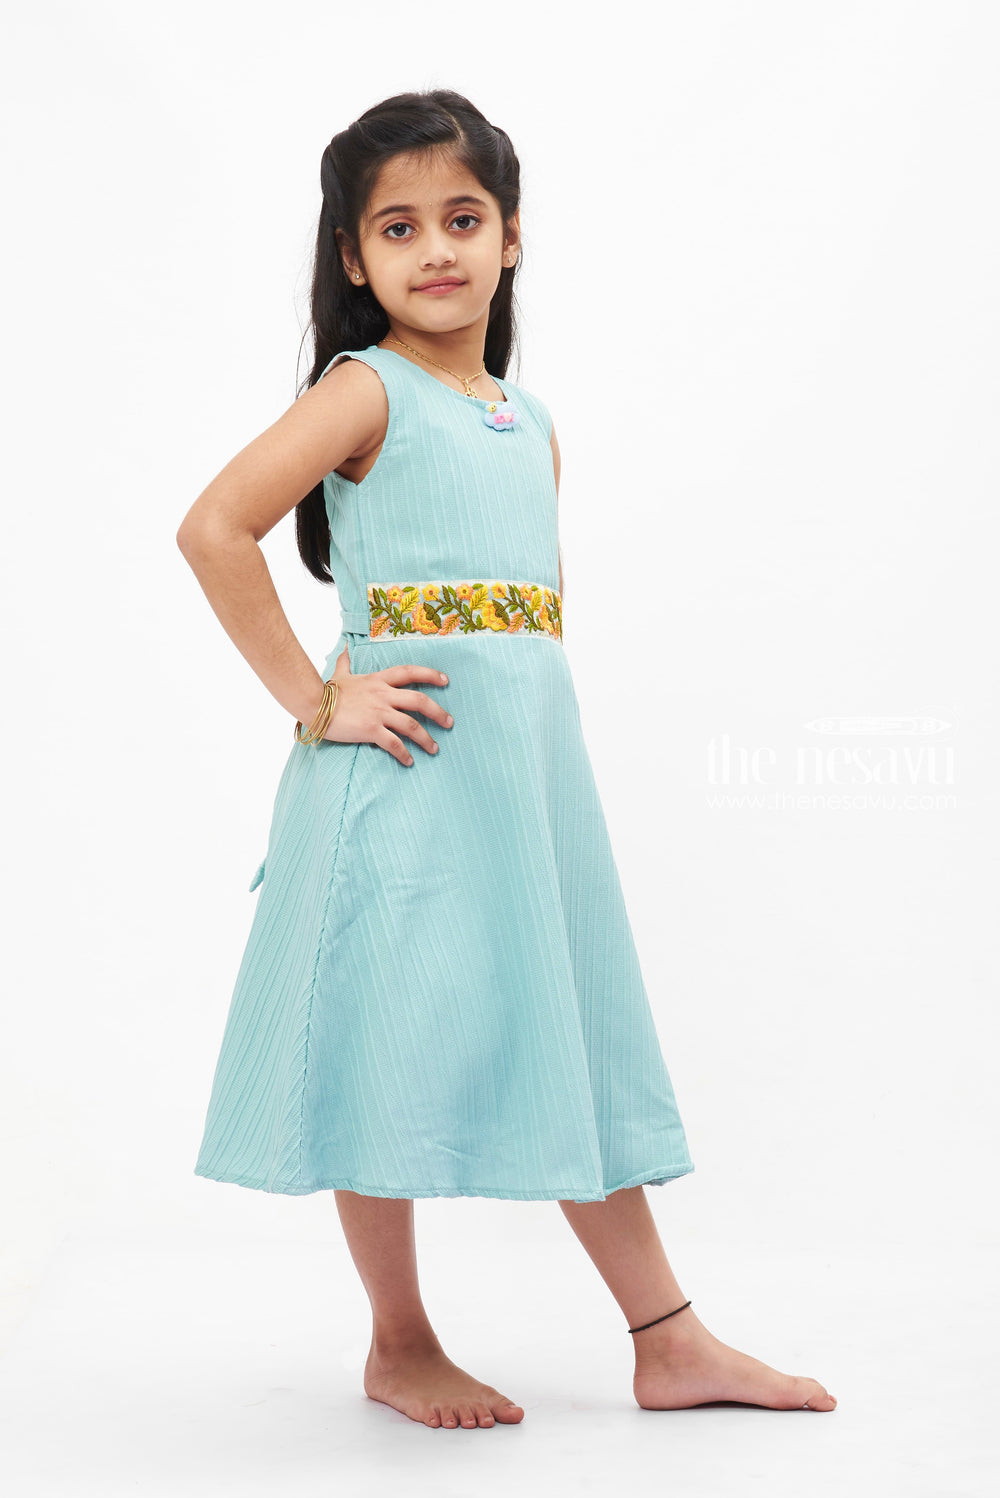 The Nesavu Girls Fancy Frock Blue Dream Pleated Frock: Refreshing Teal with Floral Accent for Girls Nesavu Girls' Teal Pleated Summer Dress | Sleeveless Floral Accent Frock | The Nesavu